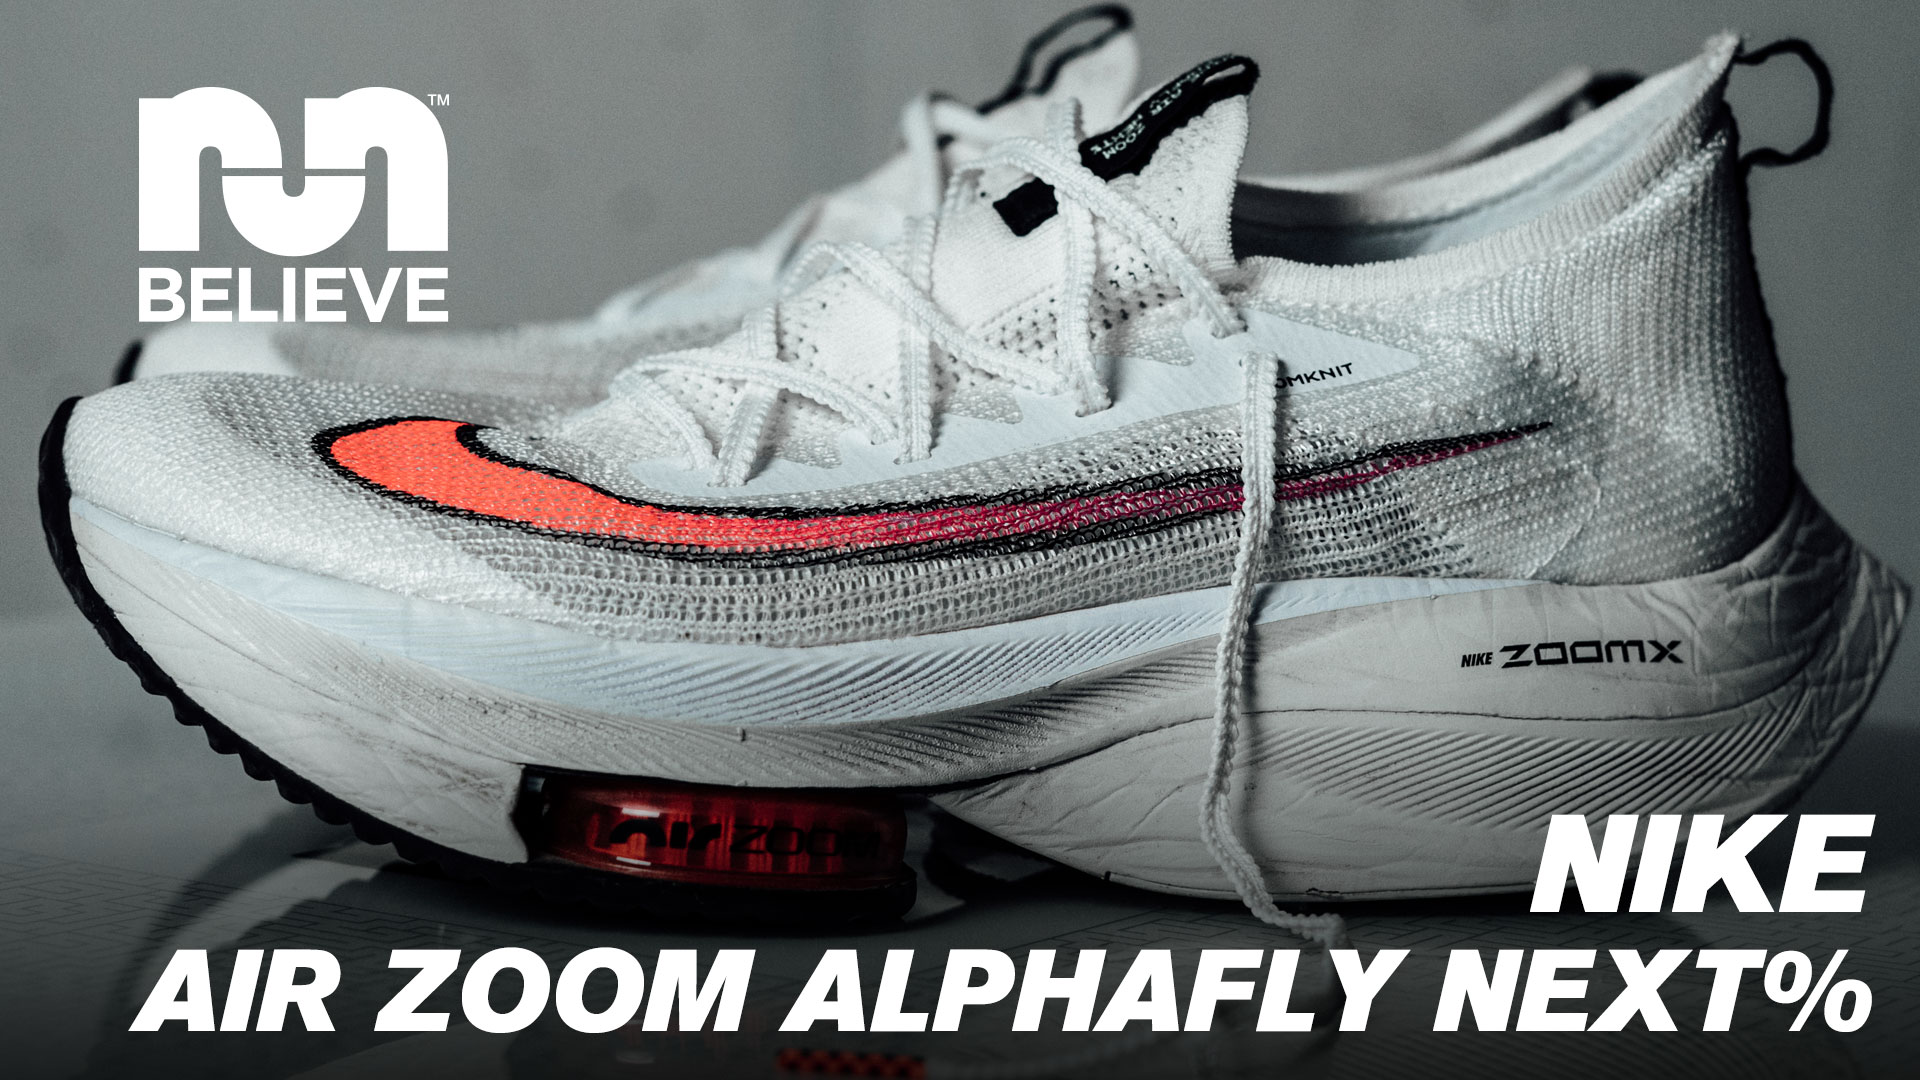 nike air zoom alphafly review